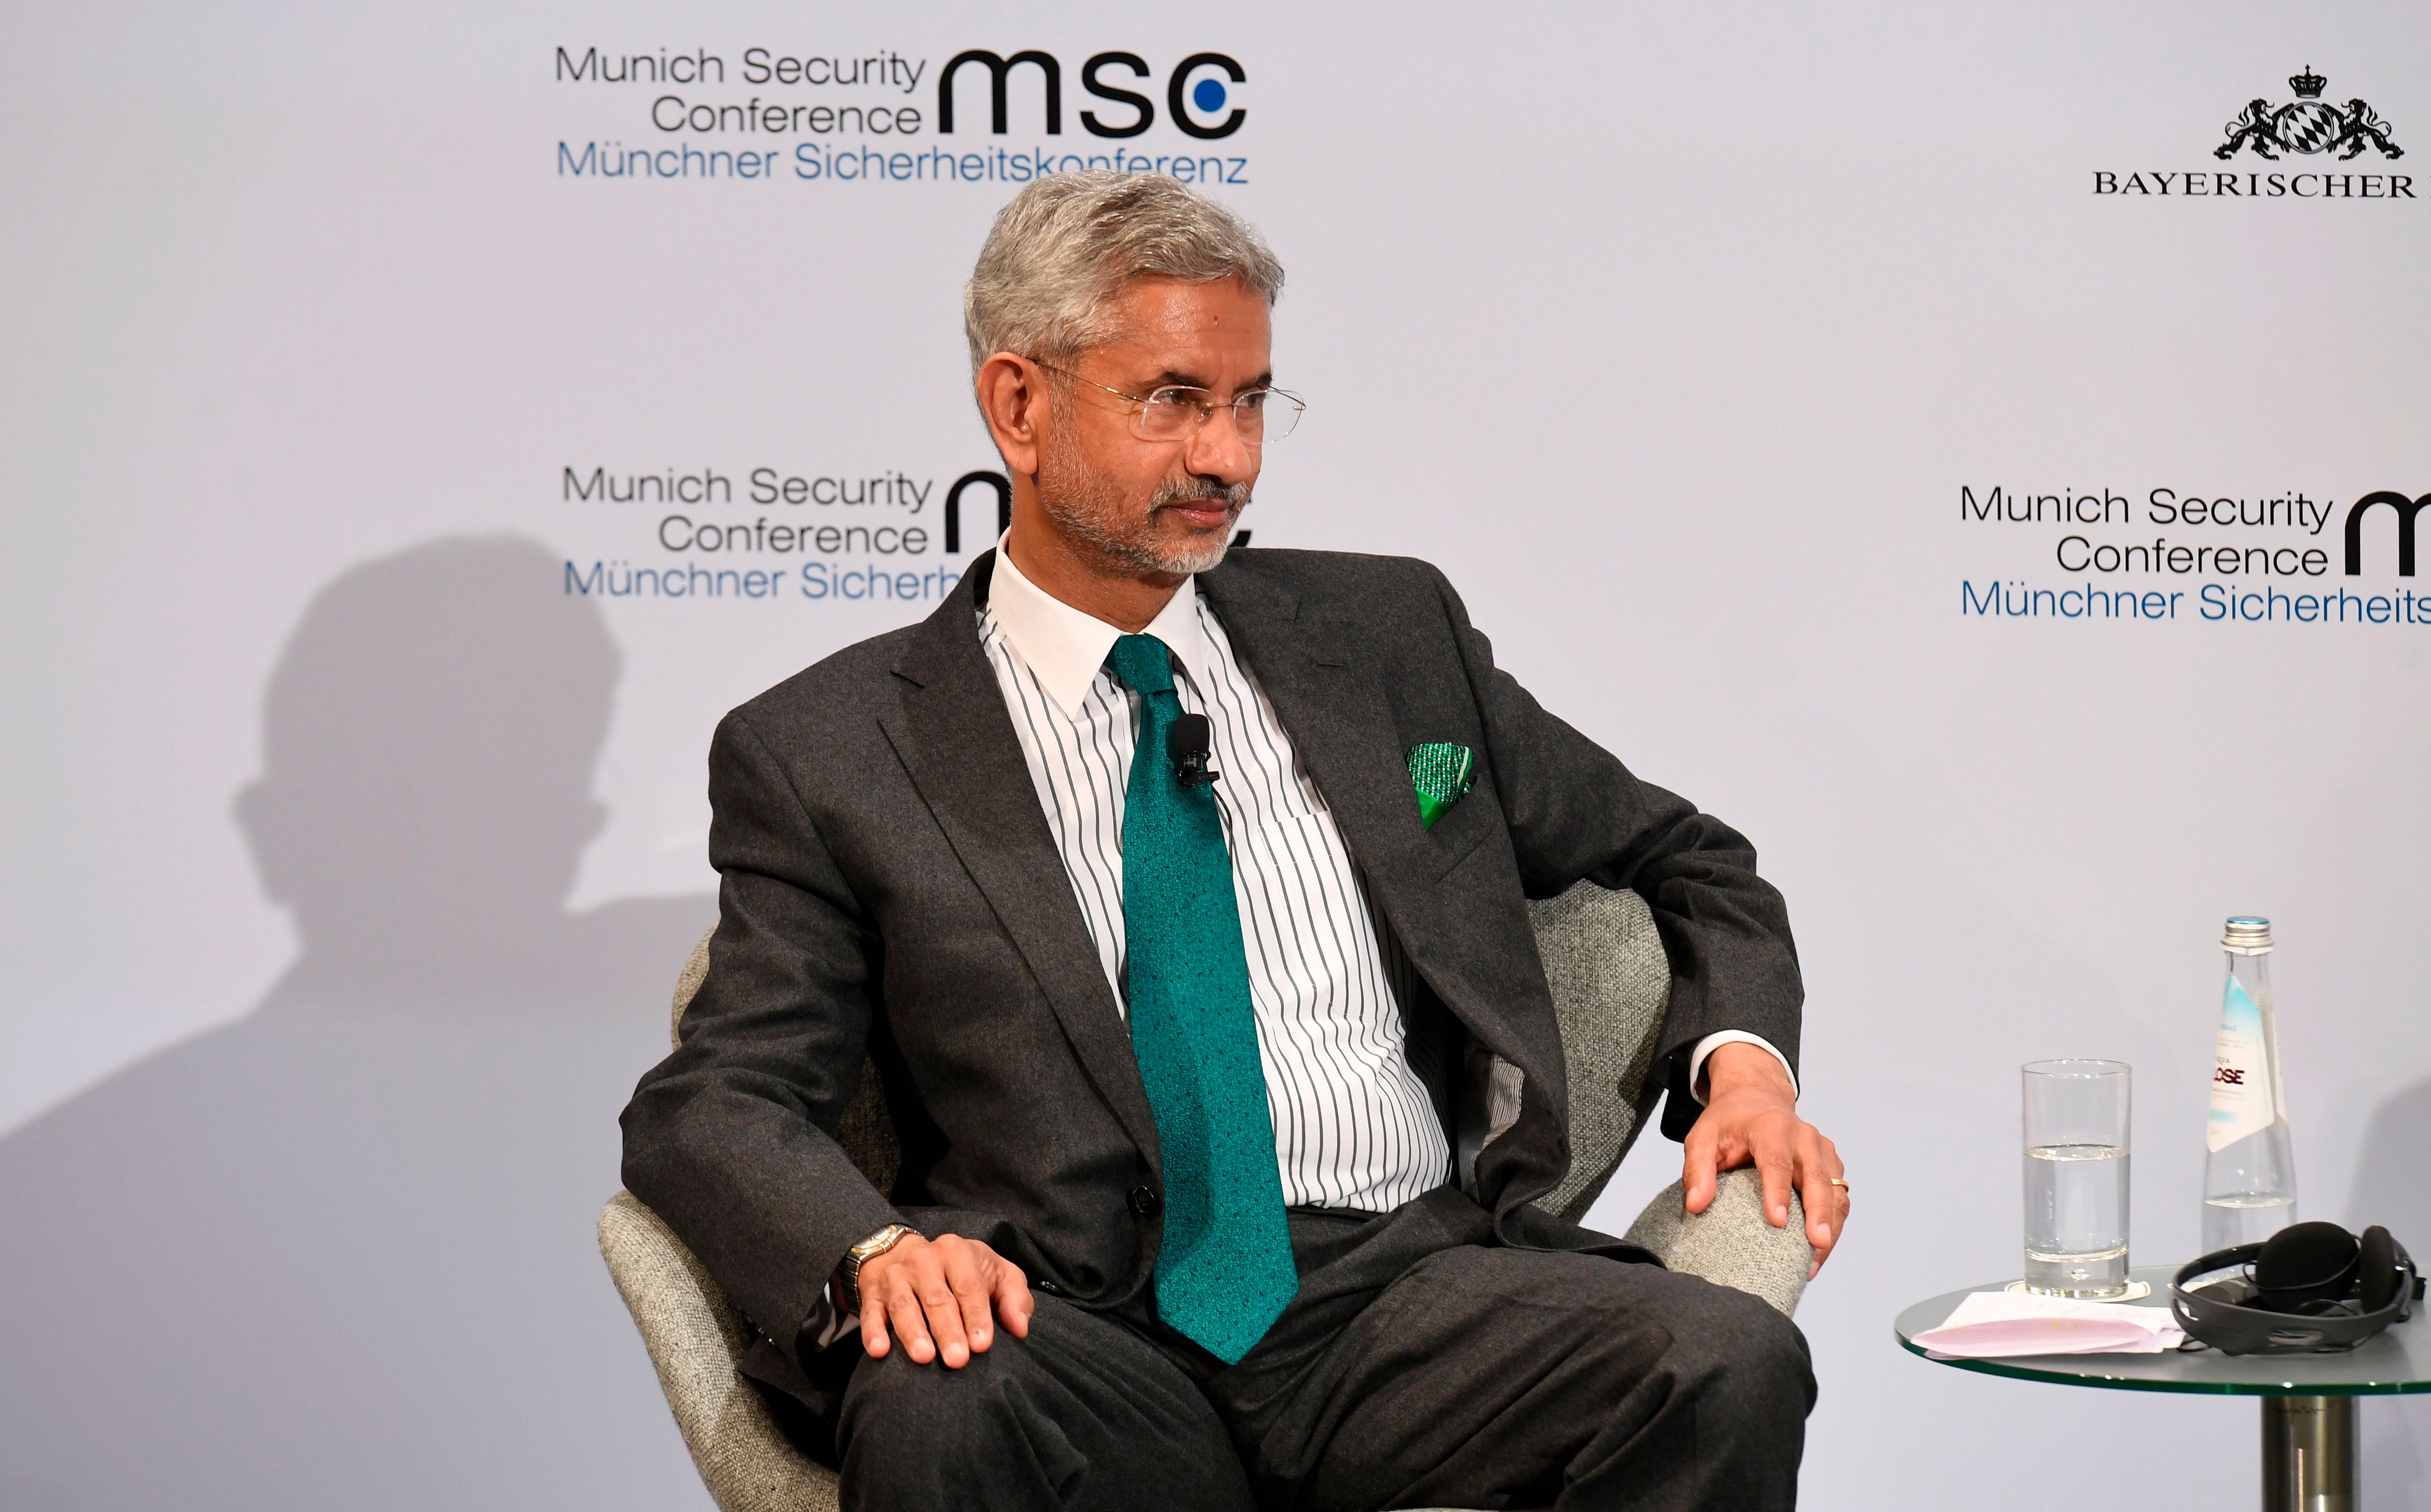 India's Minister of External Affairs Subrahmanyam Jaishankar attends a panel discussion themed "Keeping it Pacific: Managing Security Relations in Asia" during the 56th Munich Security Conference (MSC) in Munich, southern Germany, on February 15, 2020. (Credit: AFP Photo)